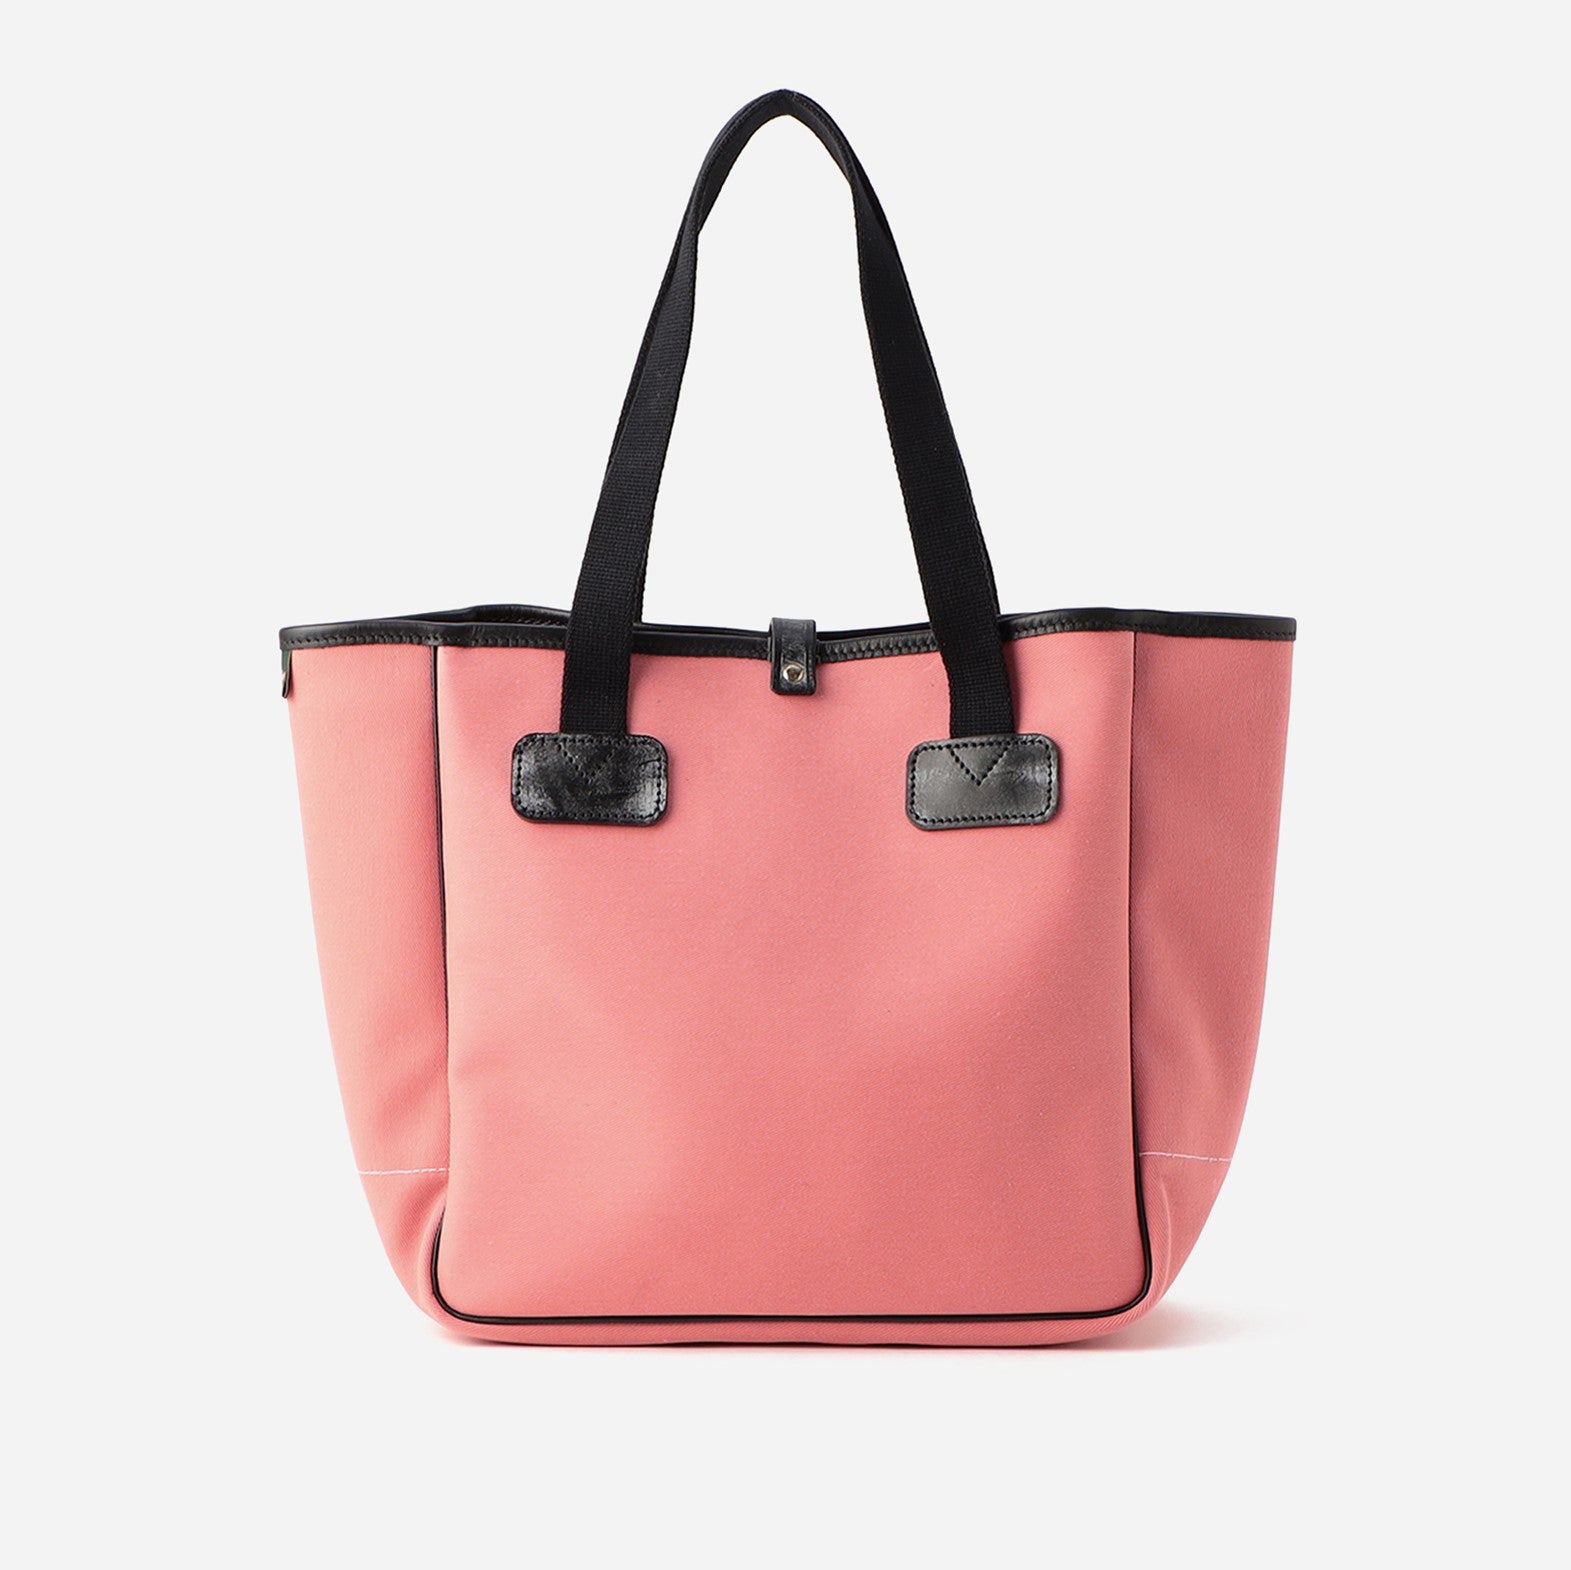 EXTRA SMALL CARRYALL COLOR